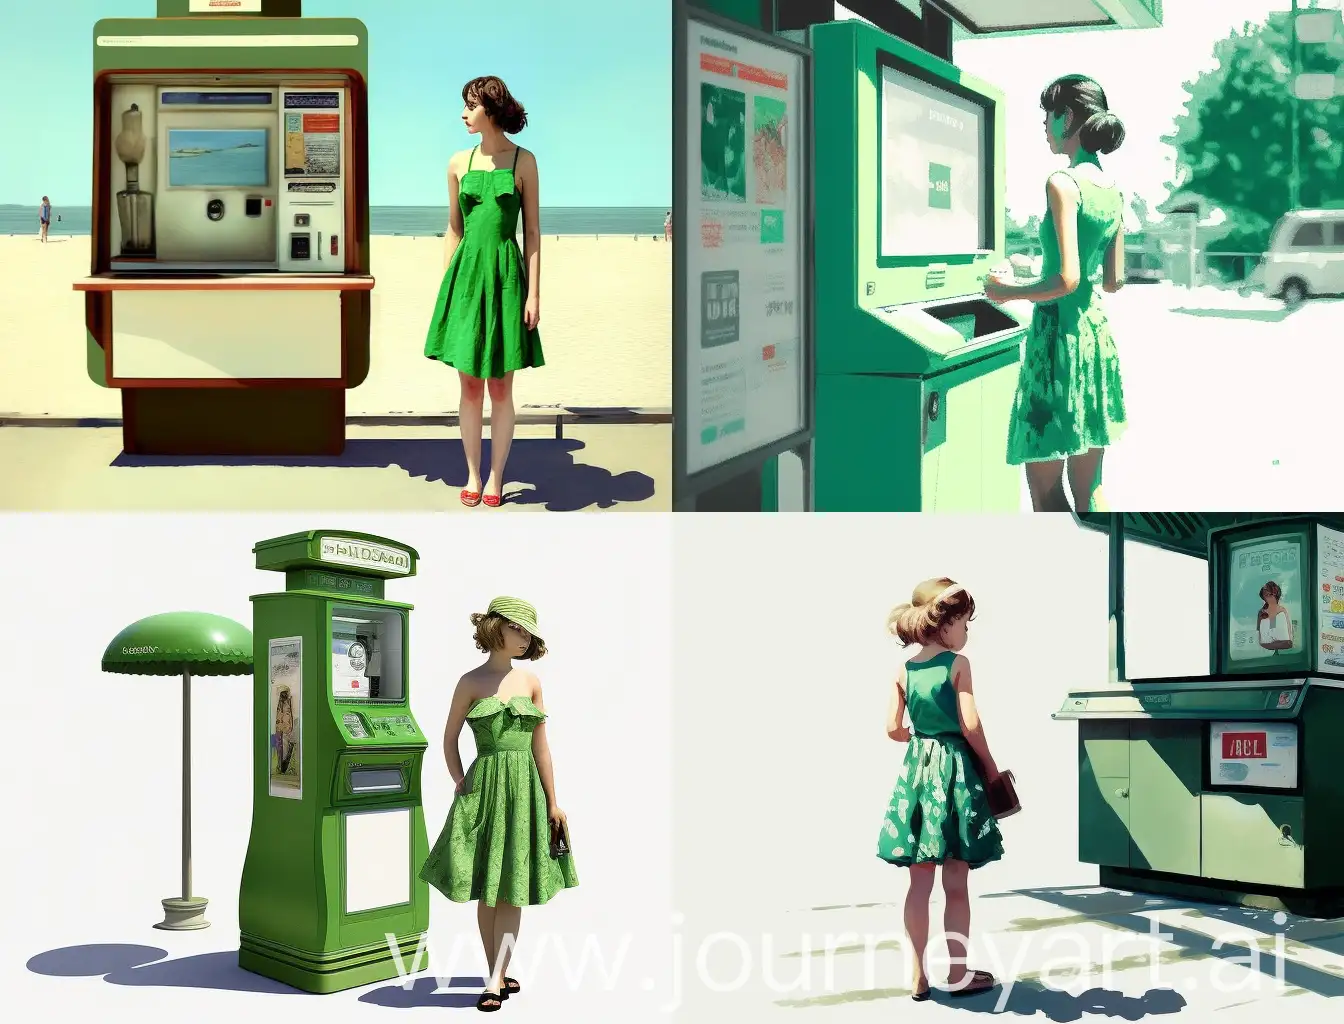 A girl in a green dress, in front of a small self-service kiosk while is paying, photo realistic style, sunny day, with a white background.